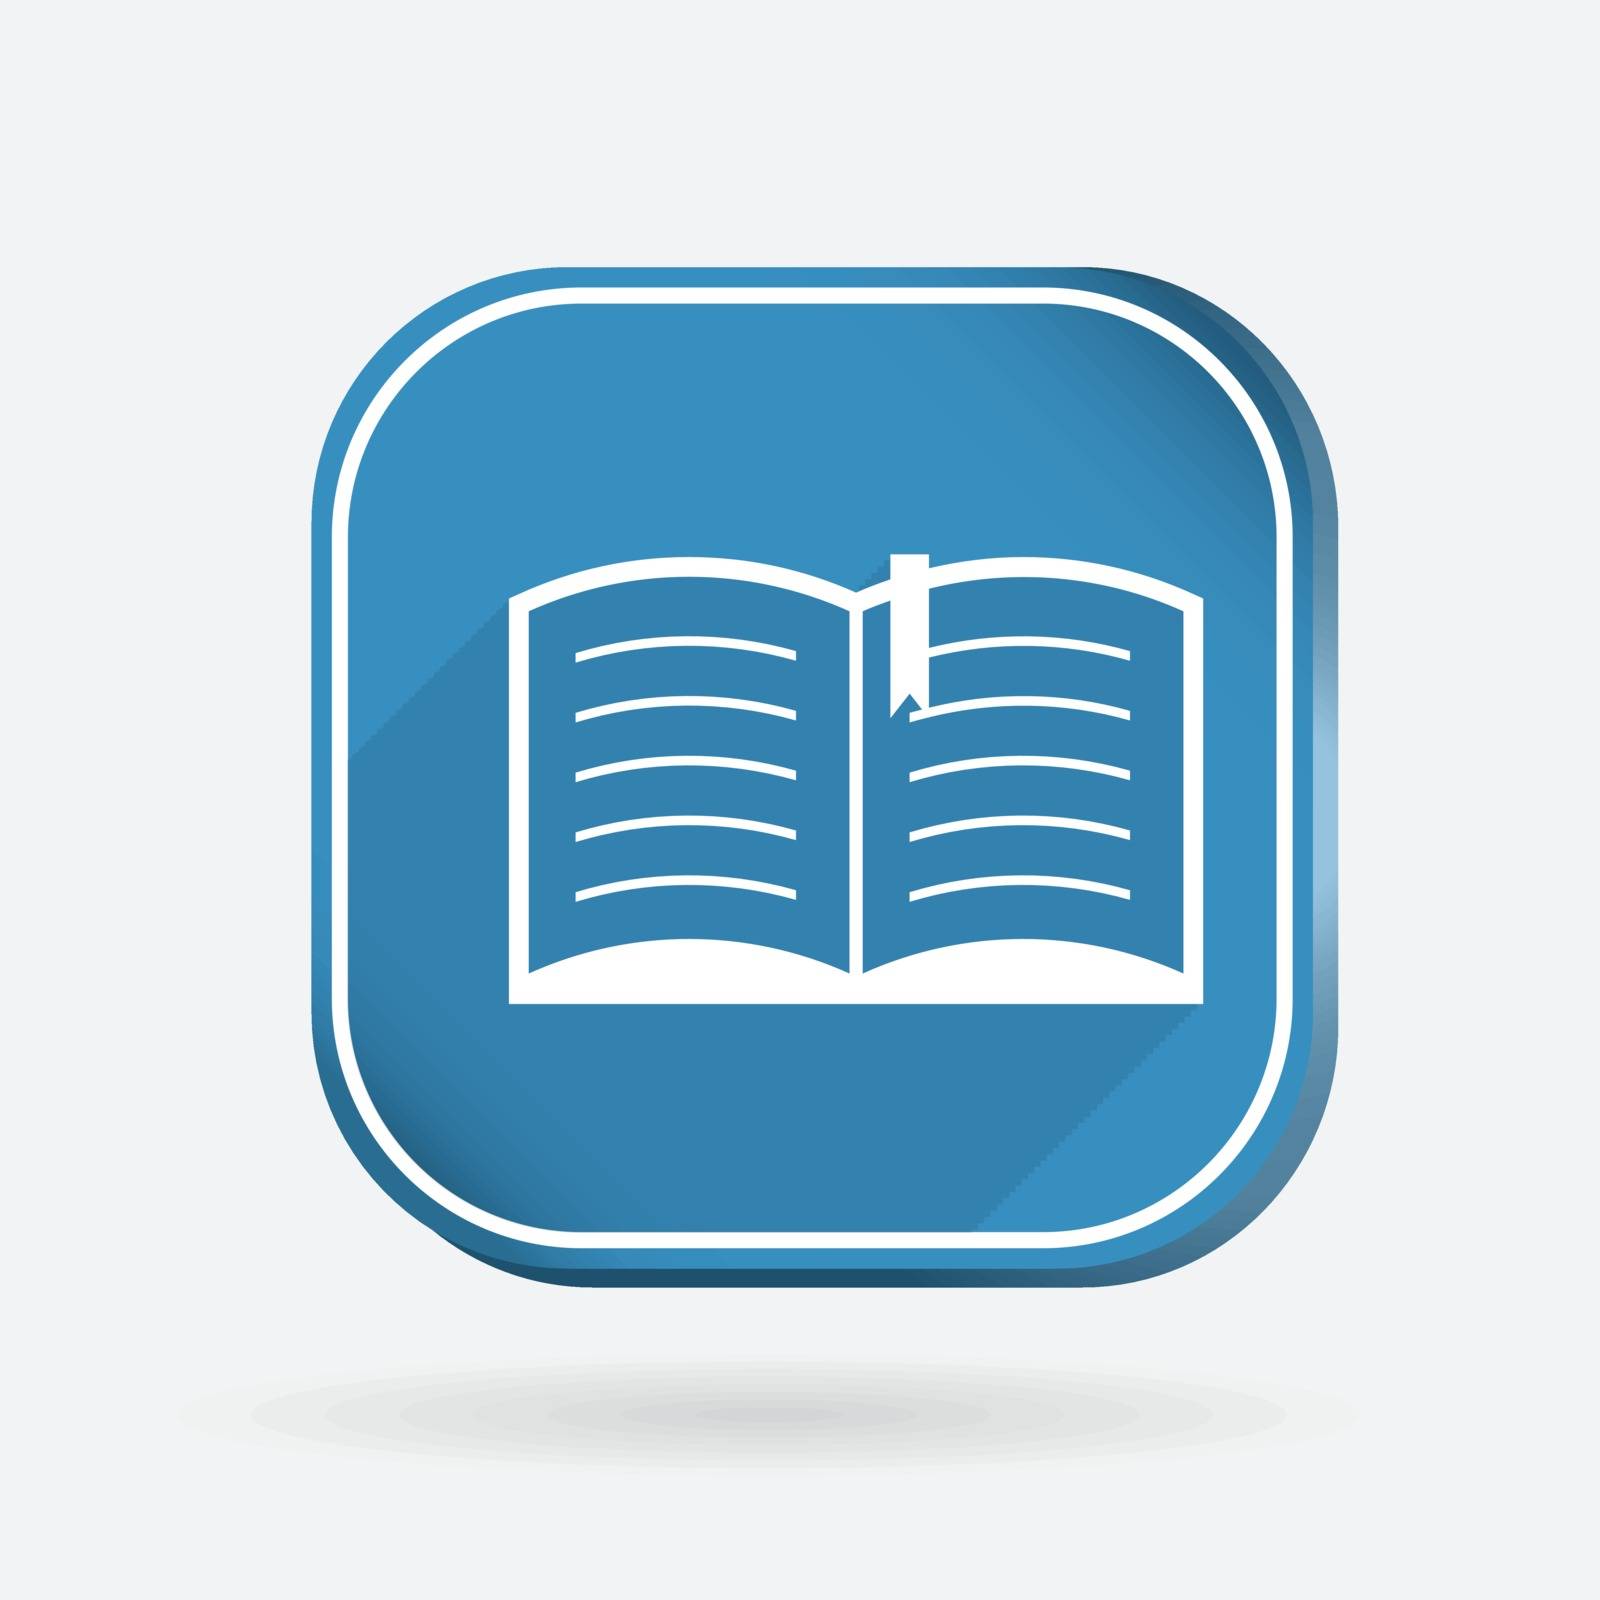 open book. Color square icon by LittleCuckoo